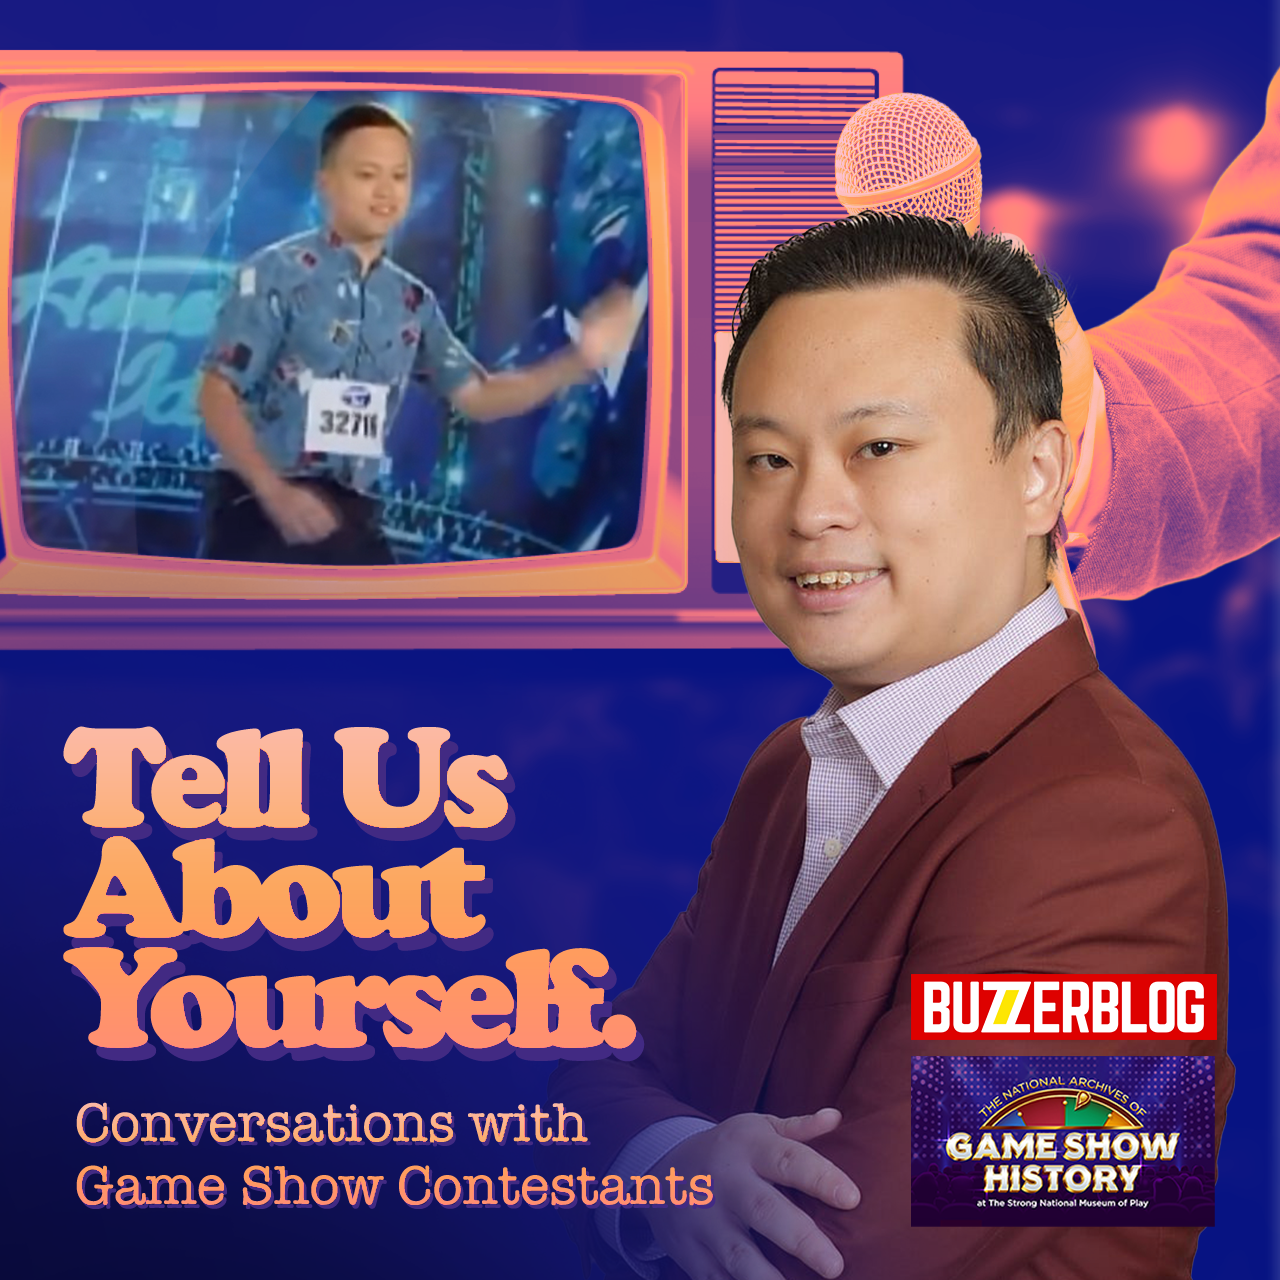 William Hung, Tell Us About Yourself.